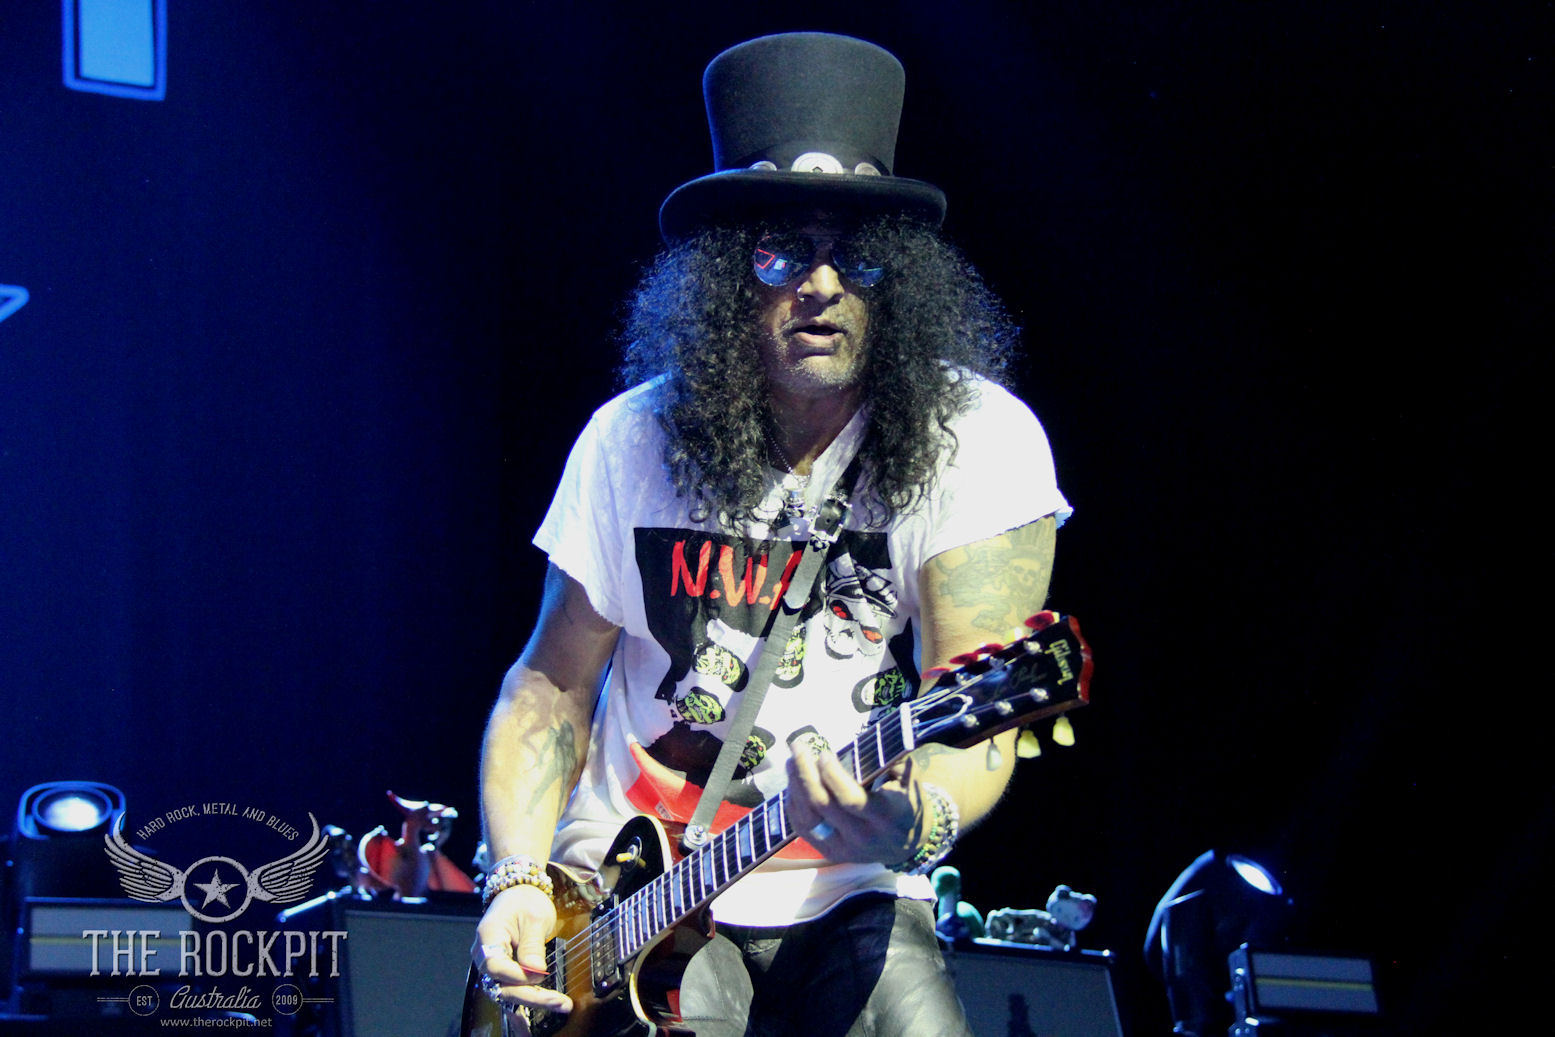 Support Announced For Slash ft Myles Kennedy Aus Tour